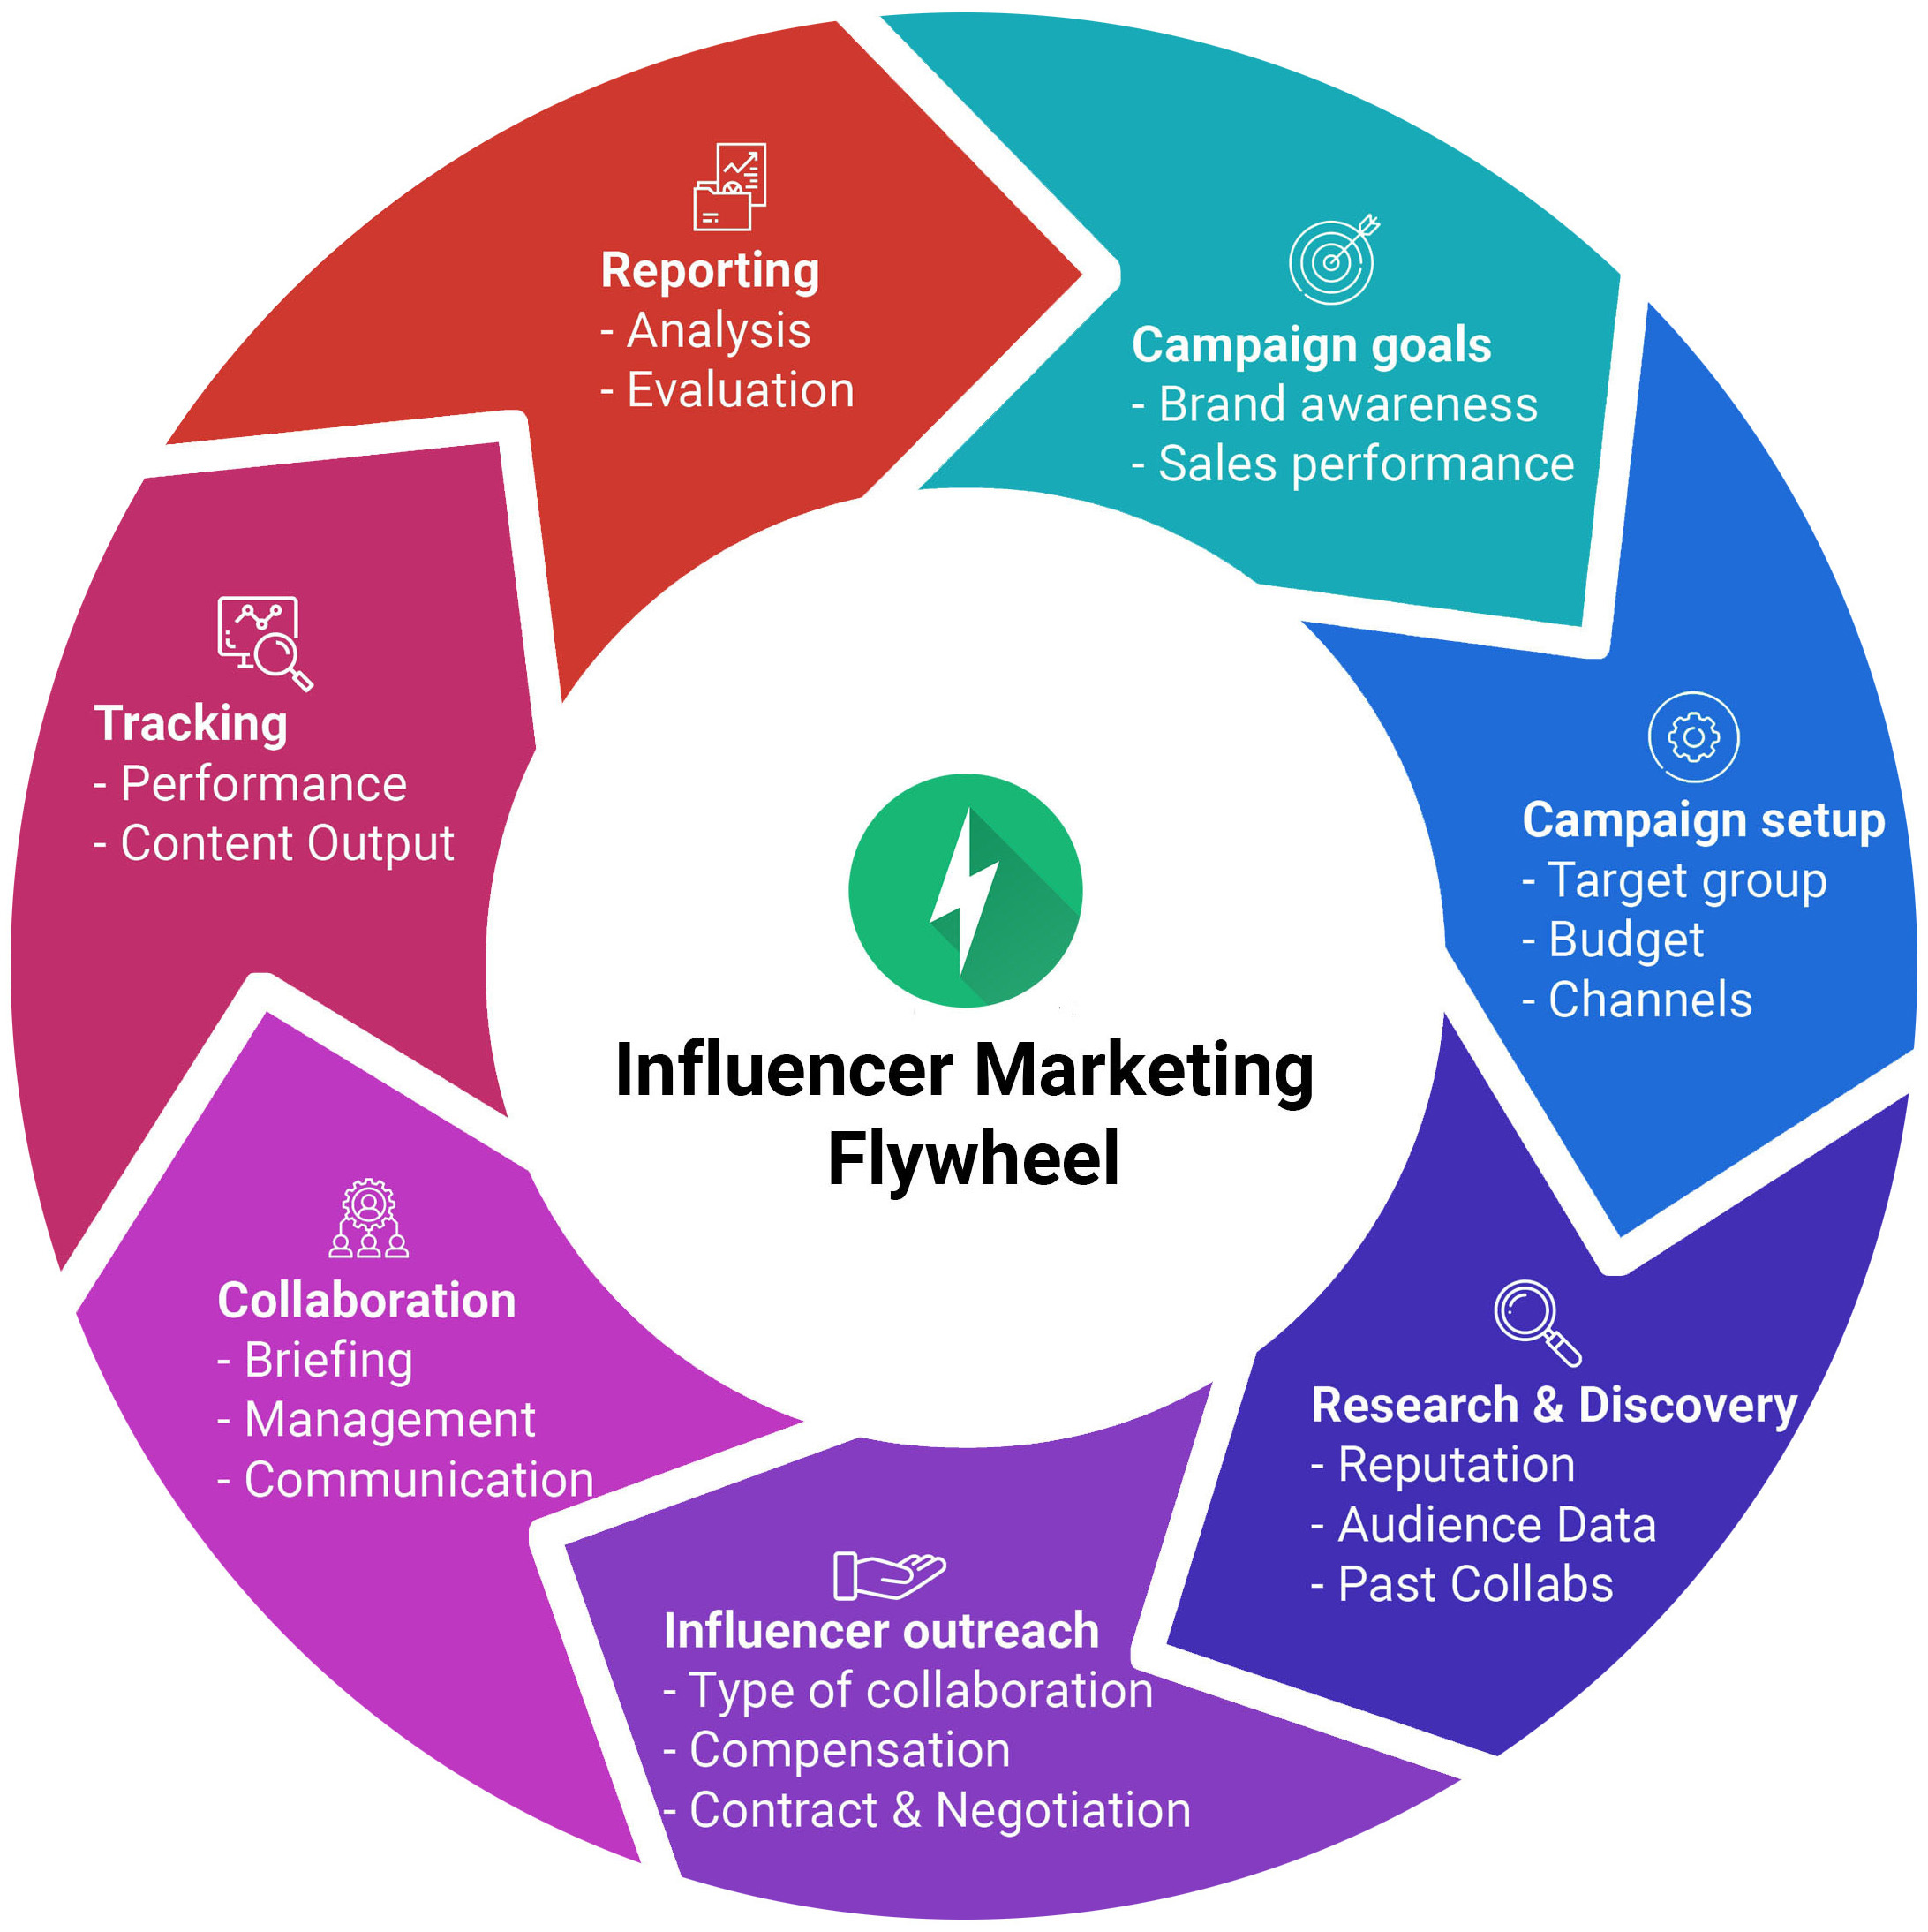 3. Influencer-to-influencer collaborations